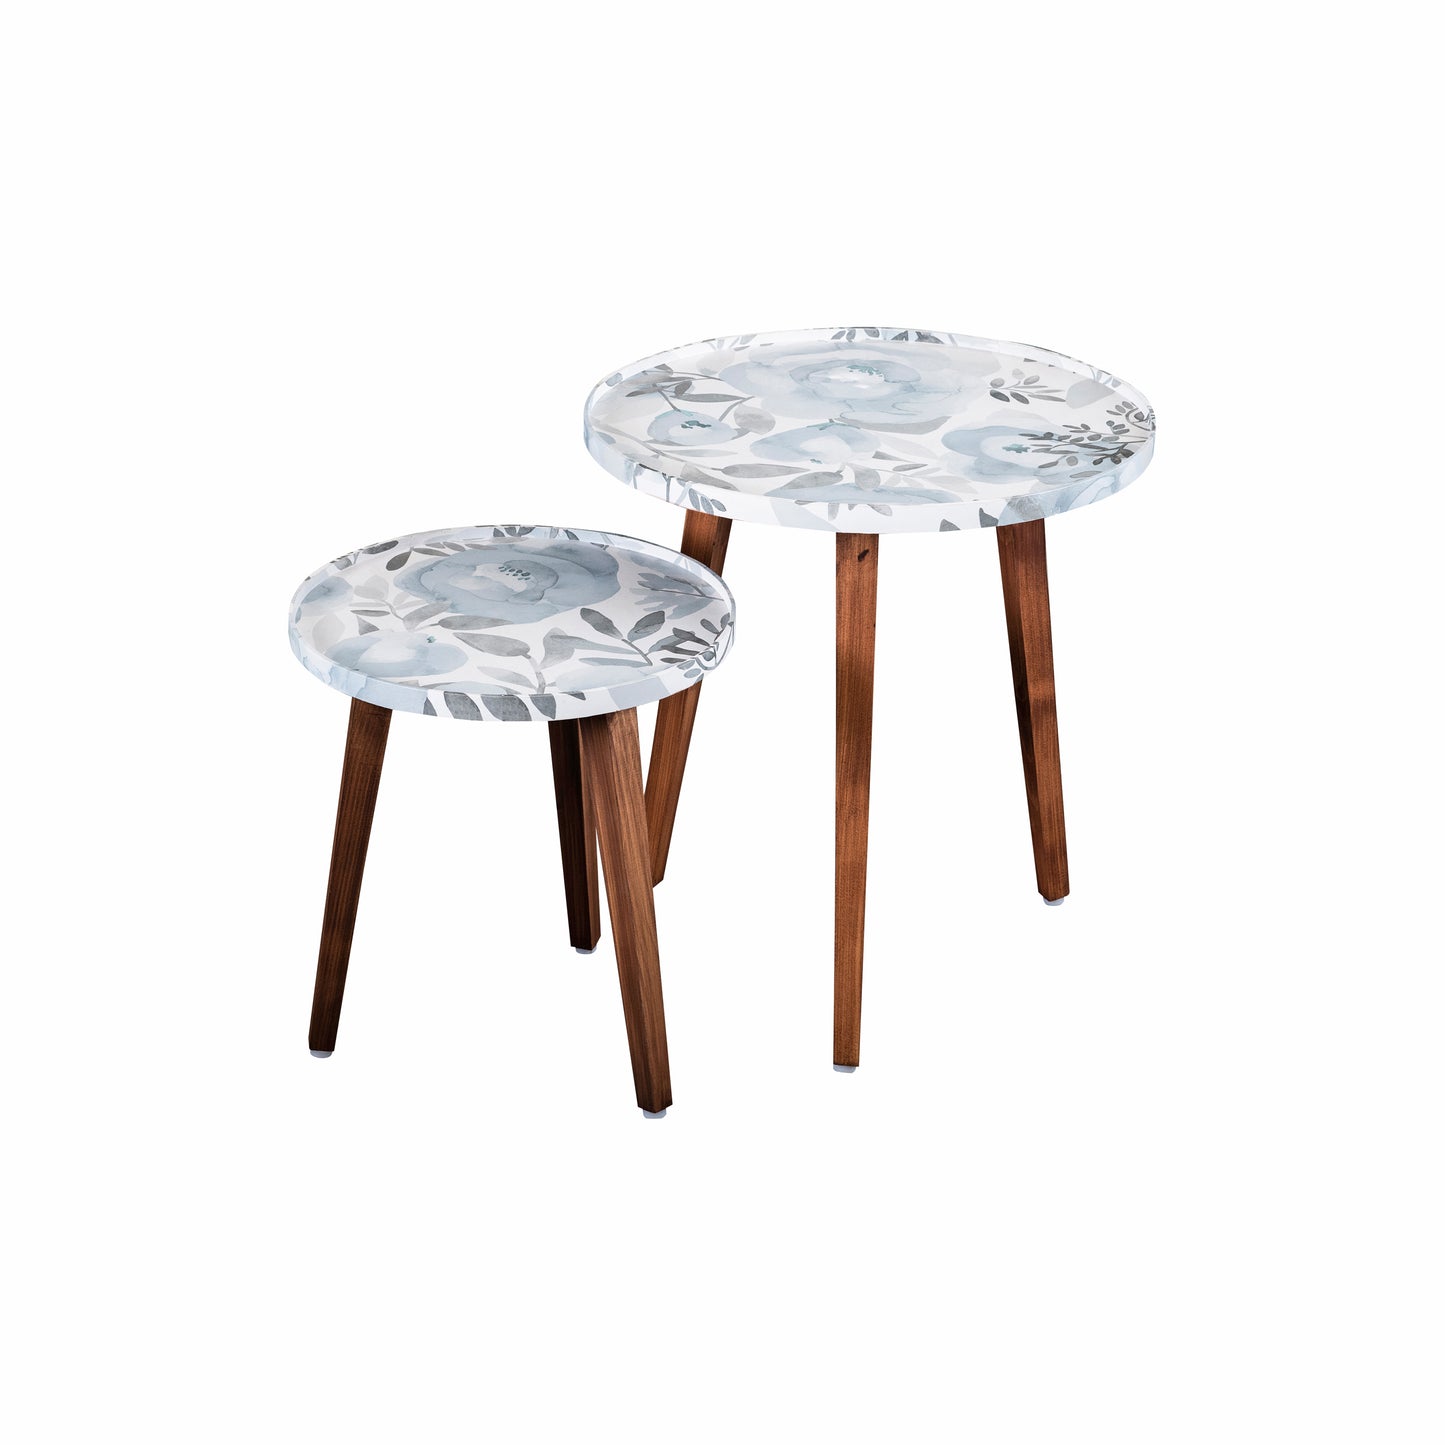 A Tiny Mistake Blossom (Blue and Grey) Wooden Nesting Tables (Set of 2), Living Room Decor